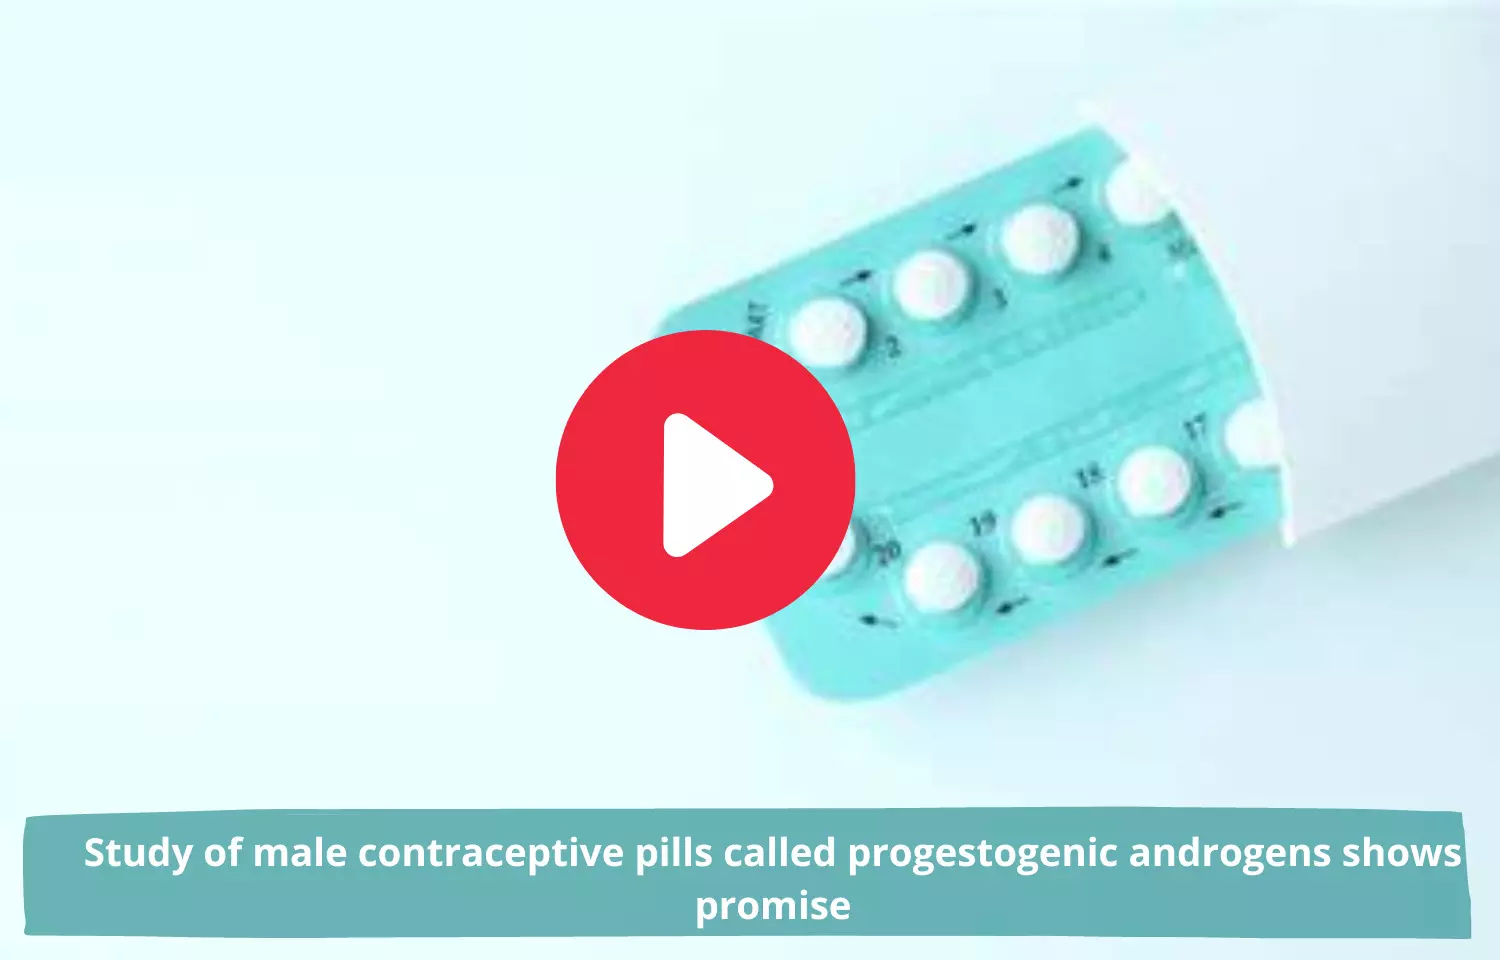 Study of male contraceptive pills called progestogenic androgens shows promise